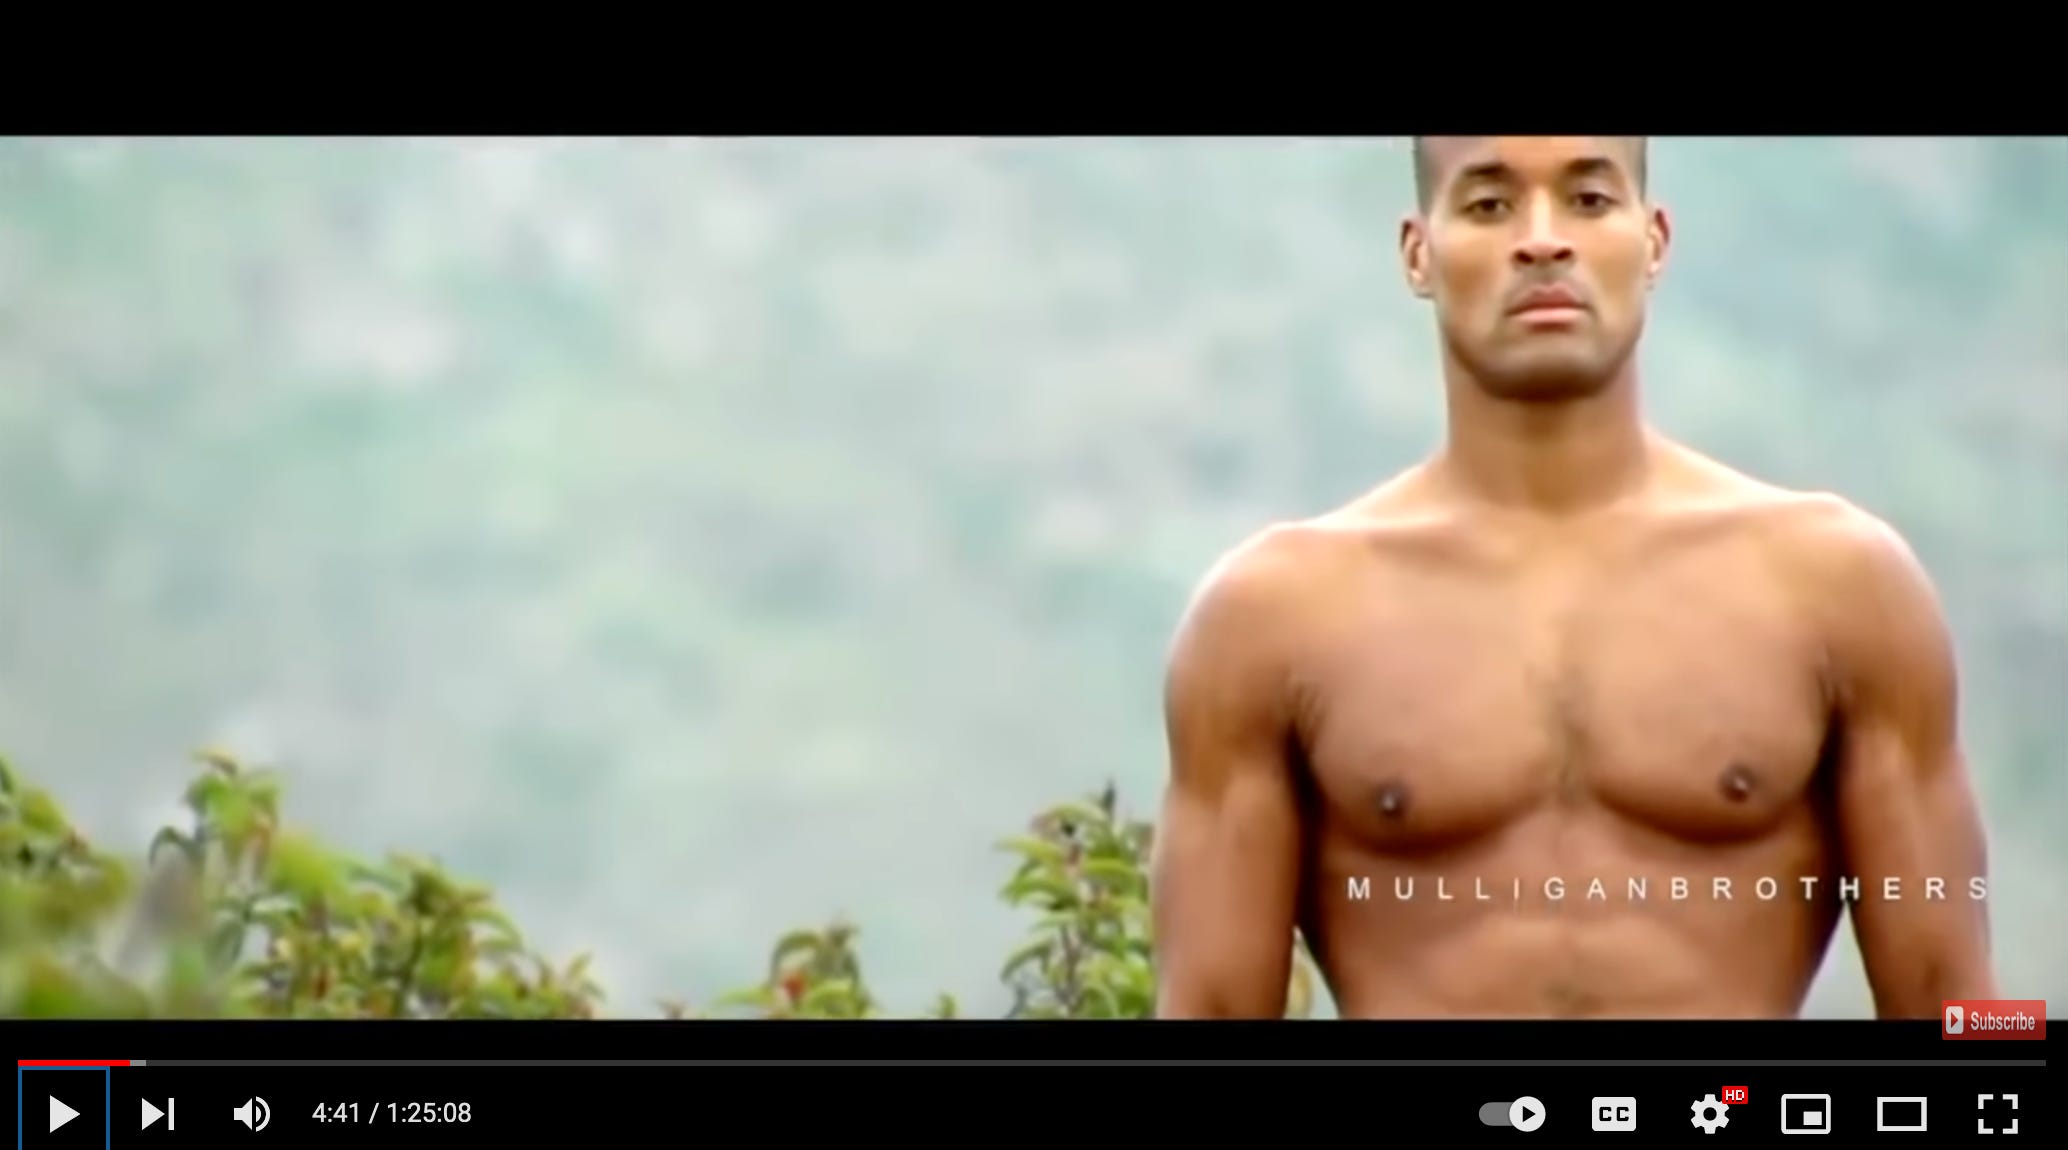 A screenshot from a YouTube video depicting shirtless man Dave Goggins